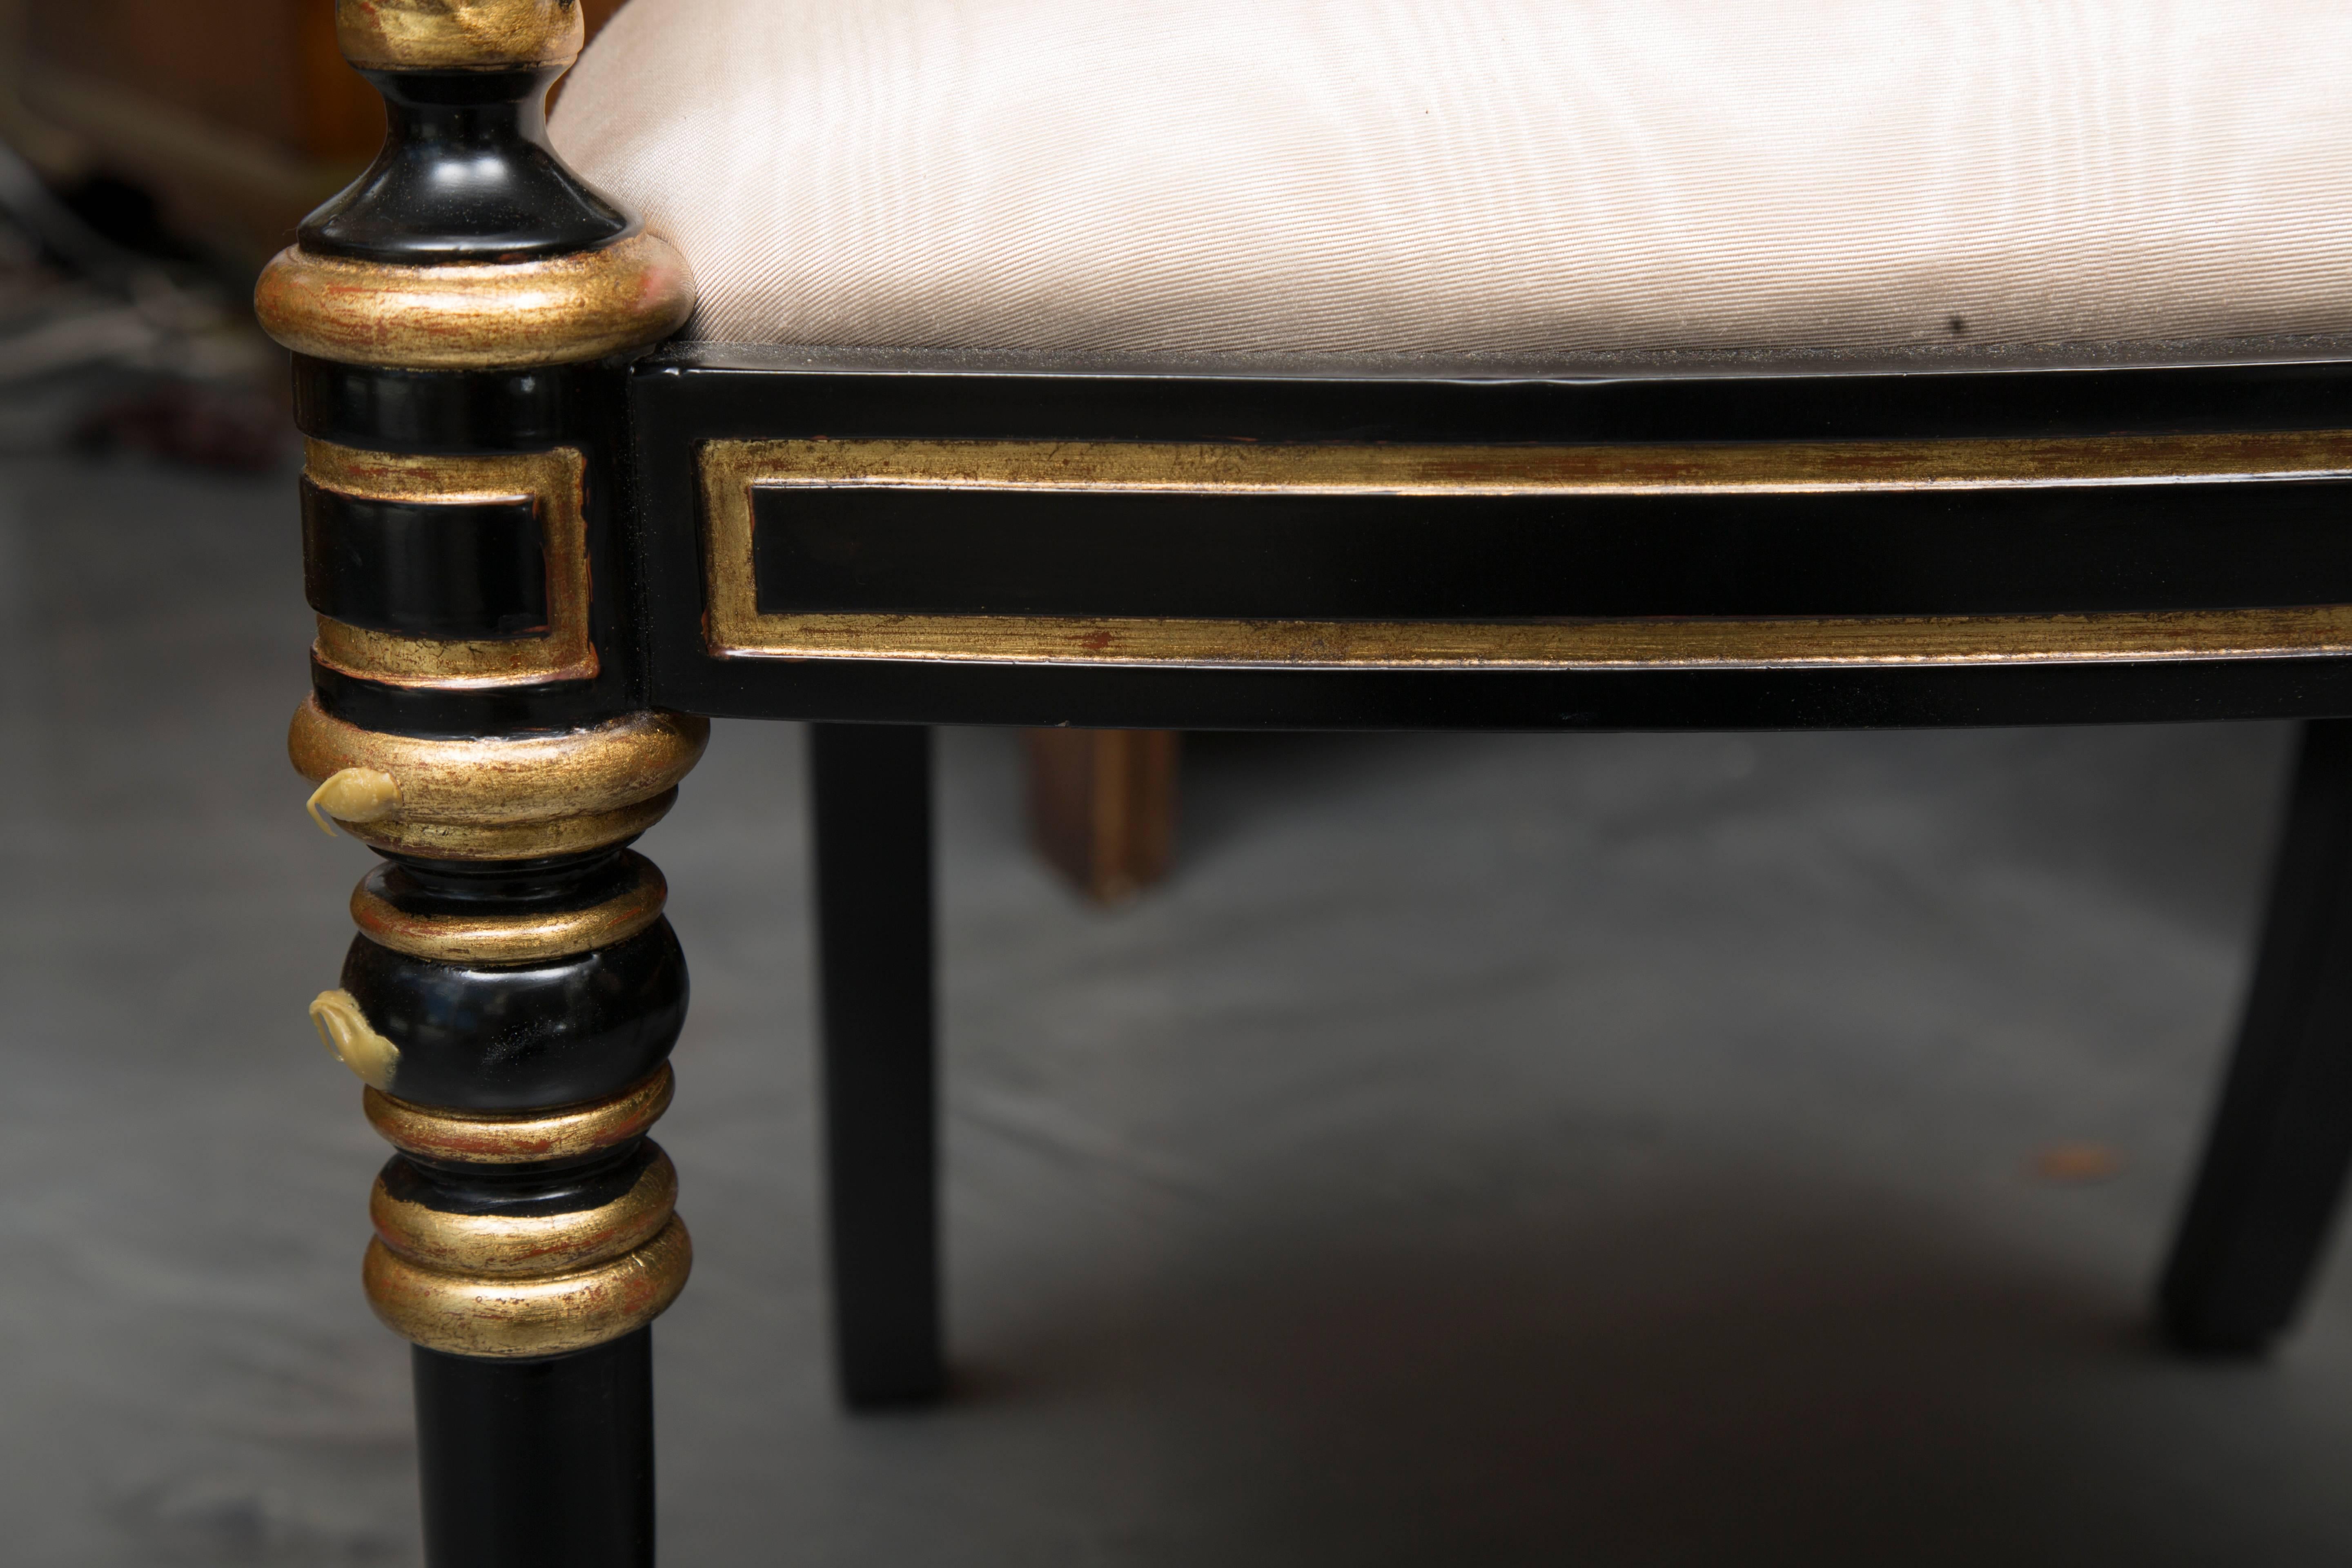 This stately pair of Regency style ebonized and parcel-gilt armchairs has a simple top rail above a back-splat flanked by out-scrolling arms above a padded seat and supported by round tapering legs, circa 20th century.